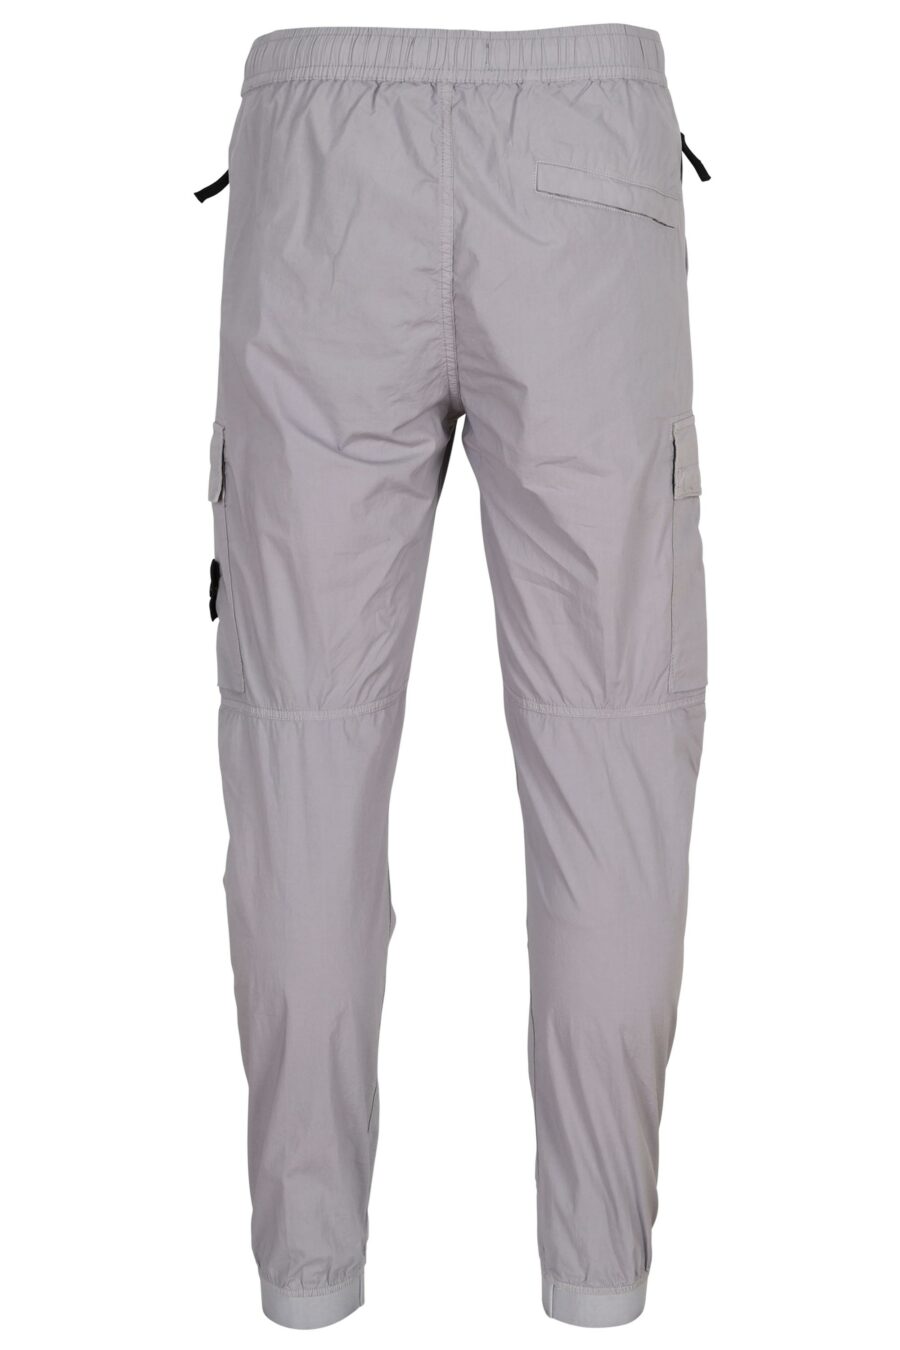 Lilac grey tapered trousers with logo compass patch - 8052572926846 1